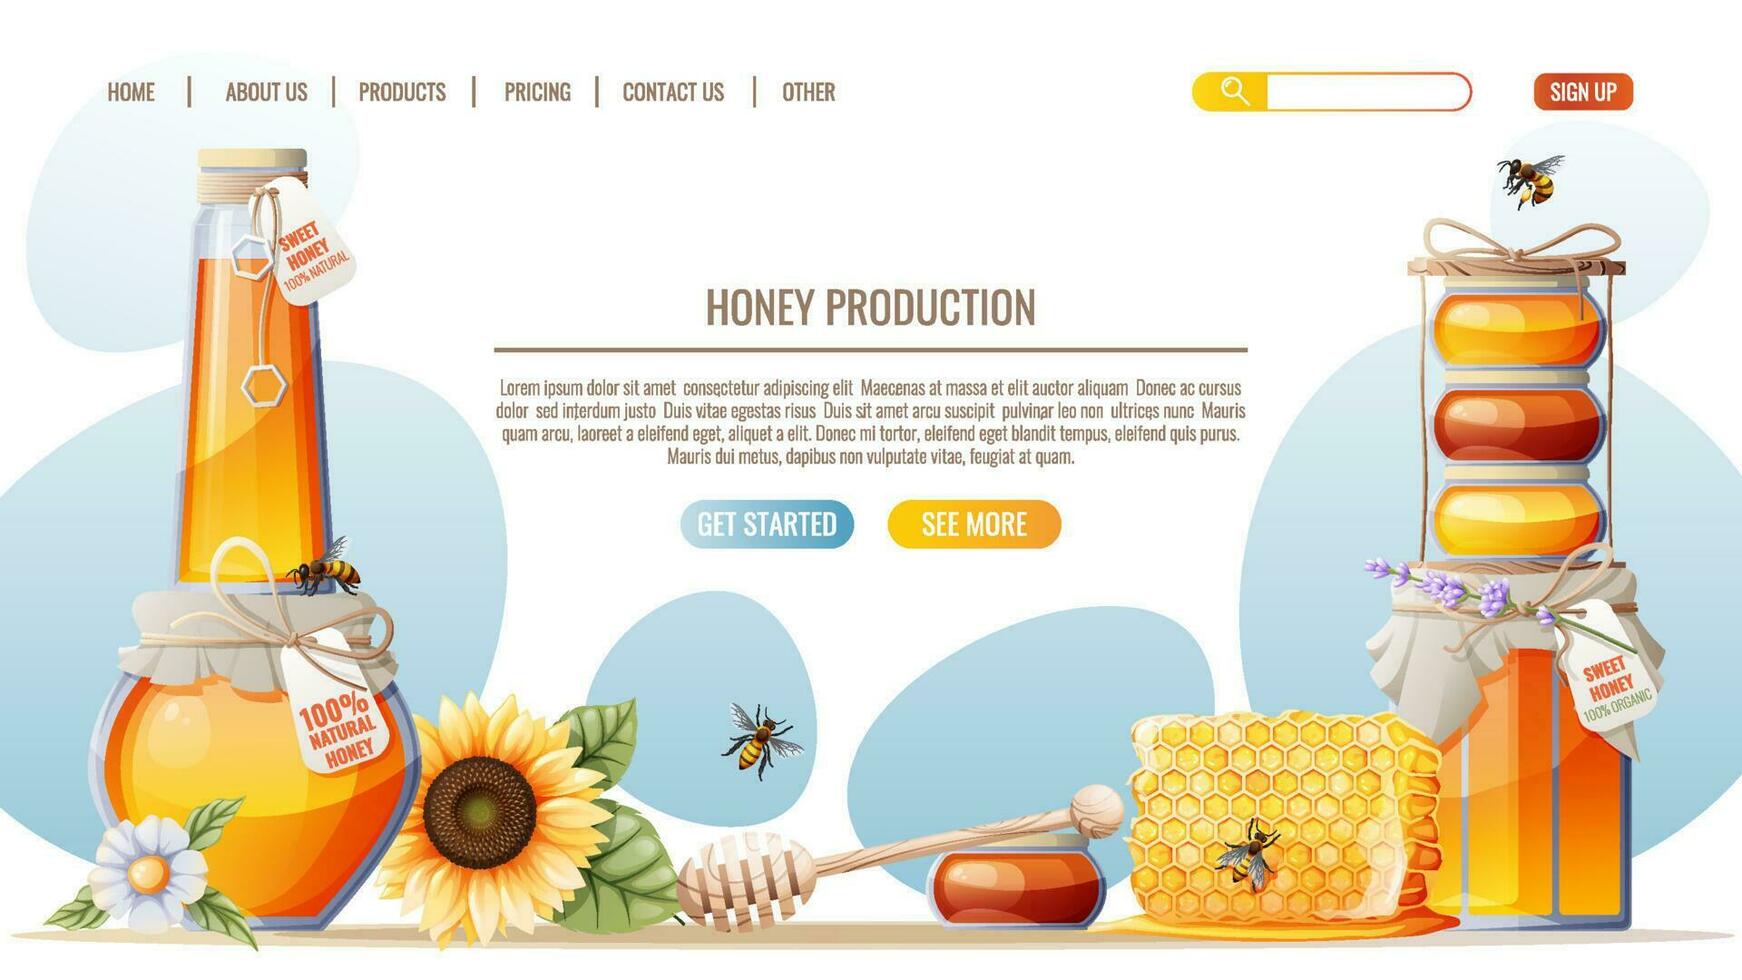 Honey products. Honeycombs, jar of honey, bees. Honey shop webpage design template. Vector illustration for banner, advertisement, web page, cover